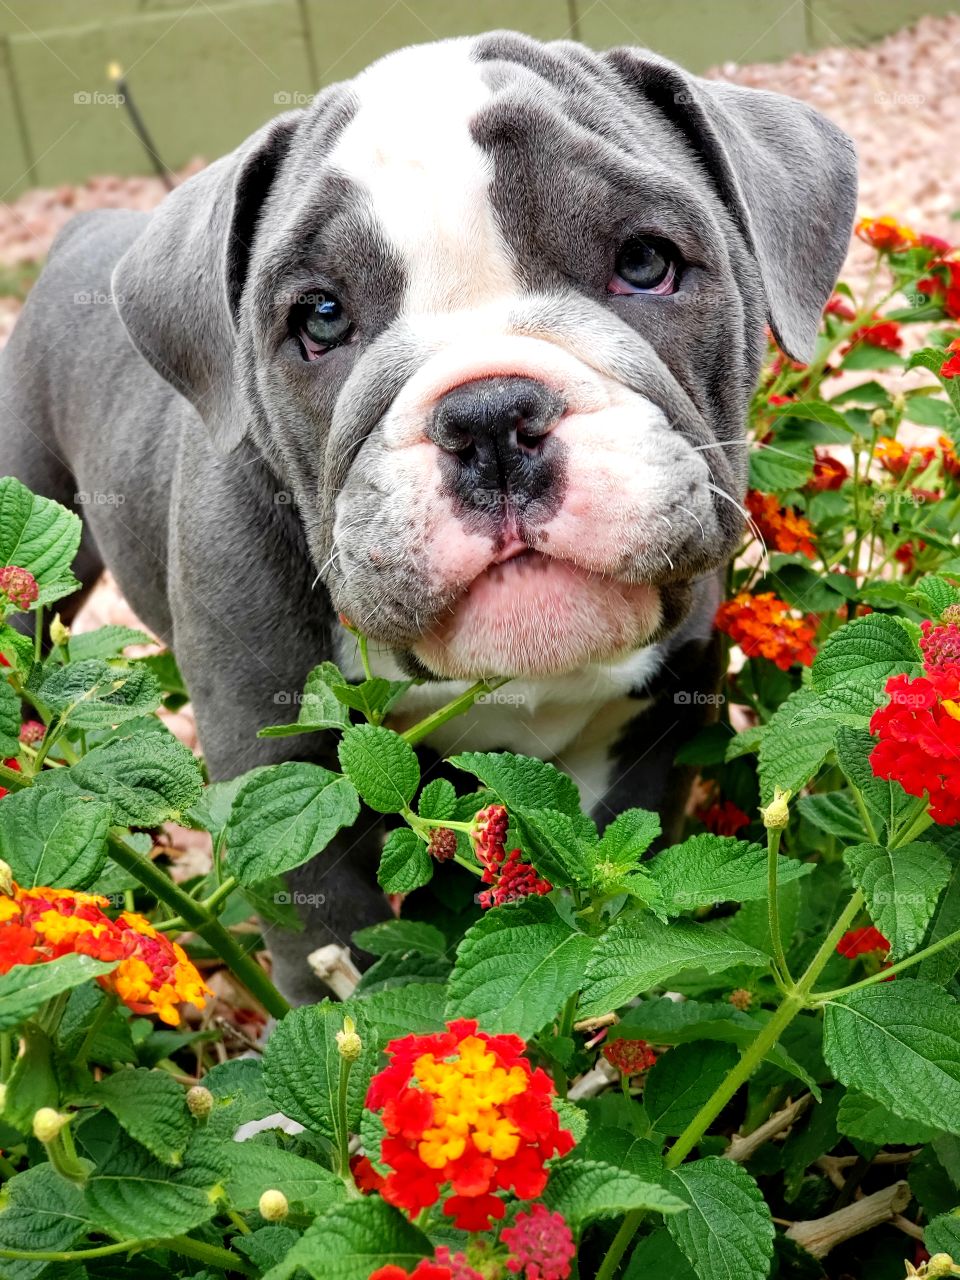 Just smelling flowers